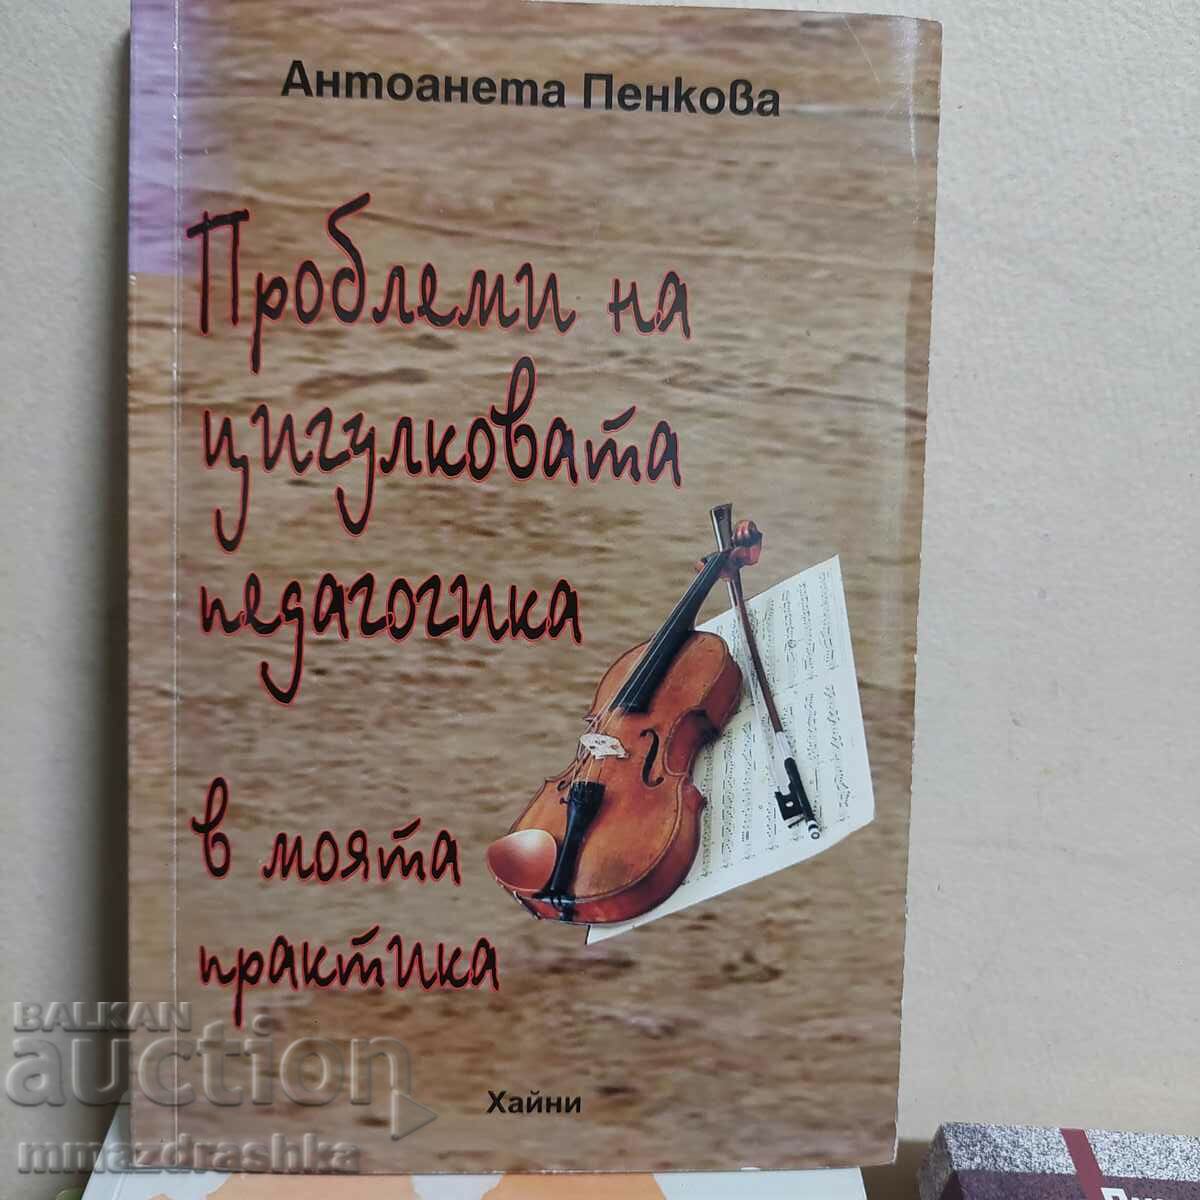 Problems of violin pedagogy in my practice, autograph